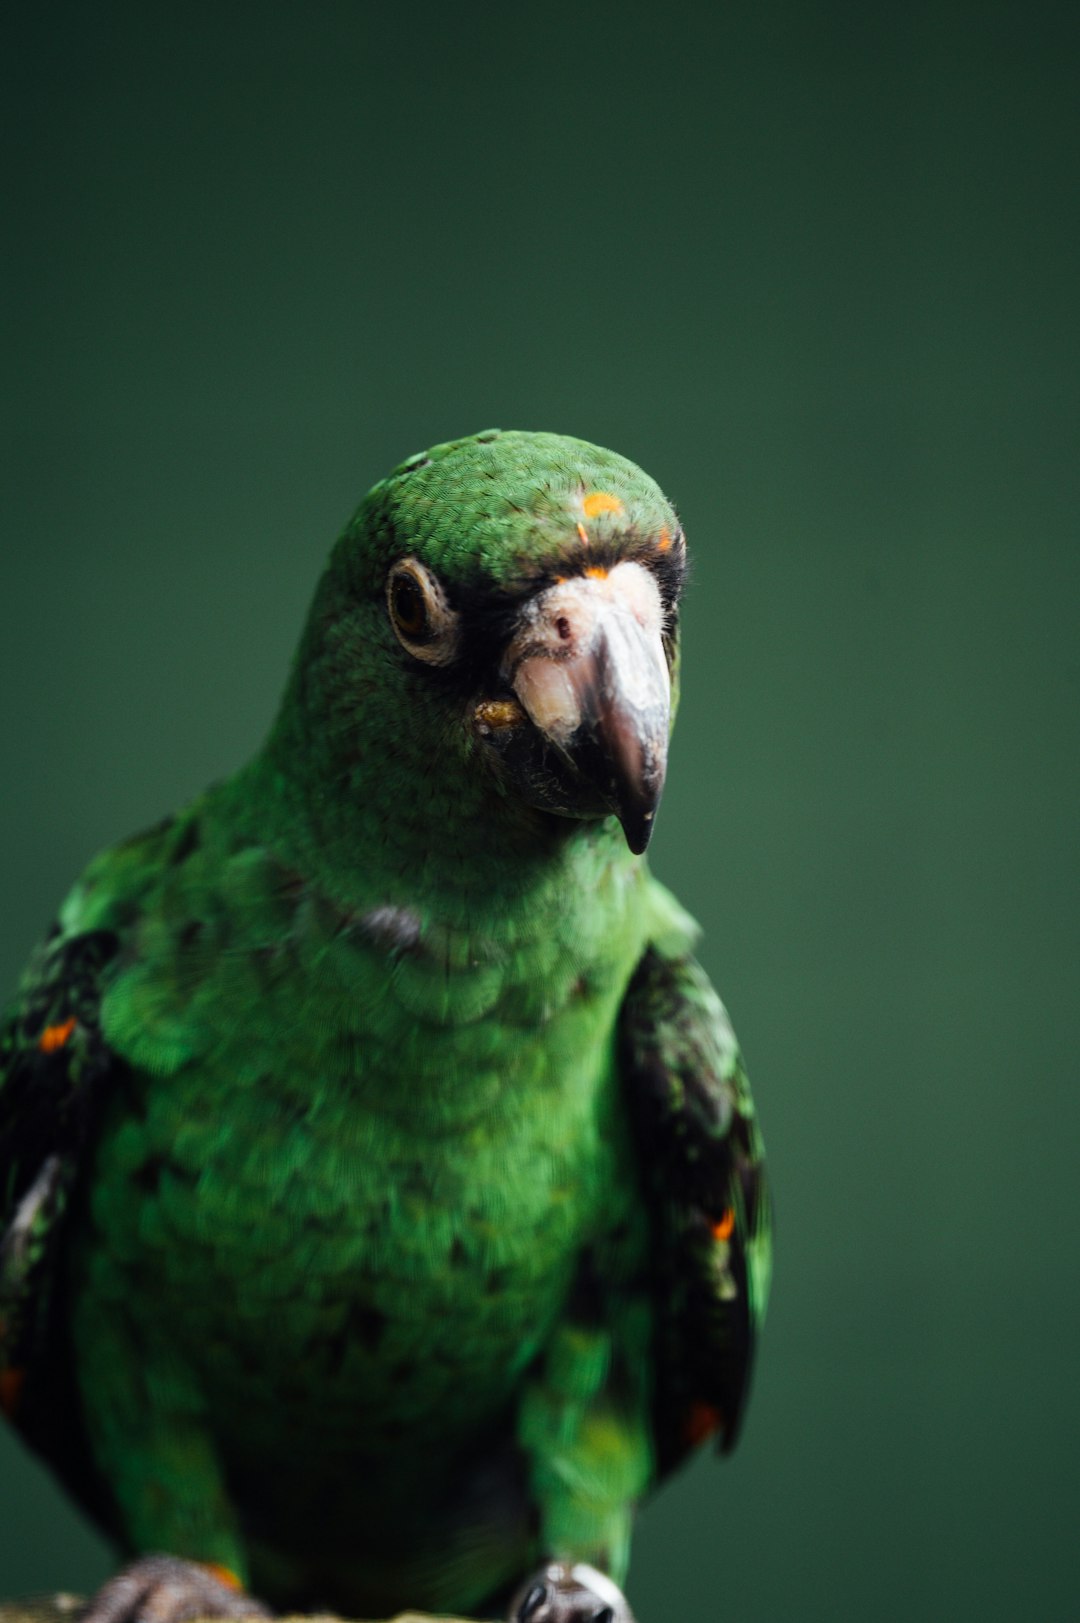 green bird in close up photography